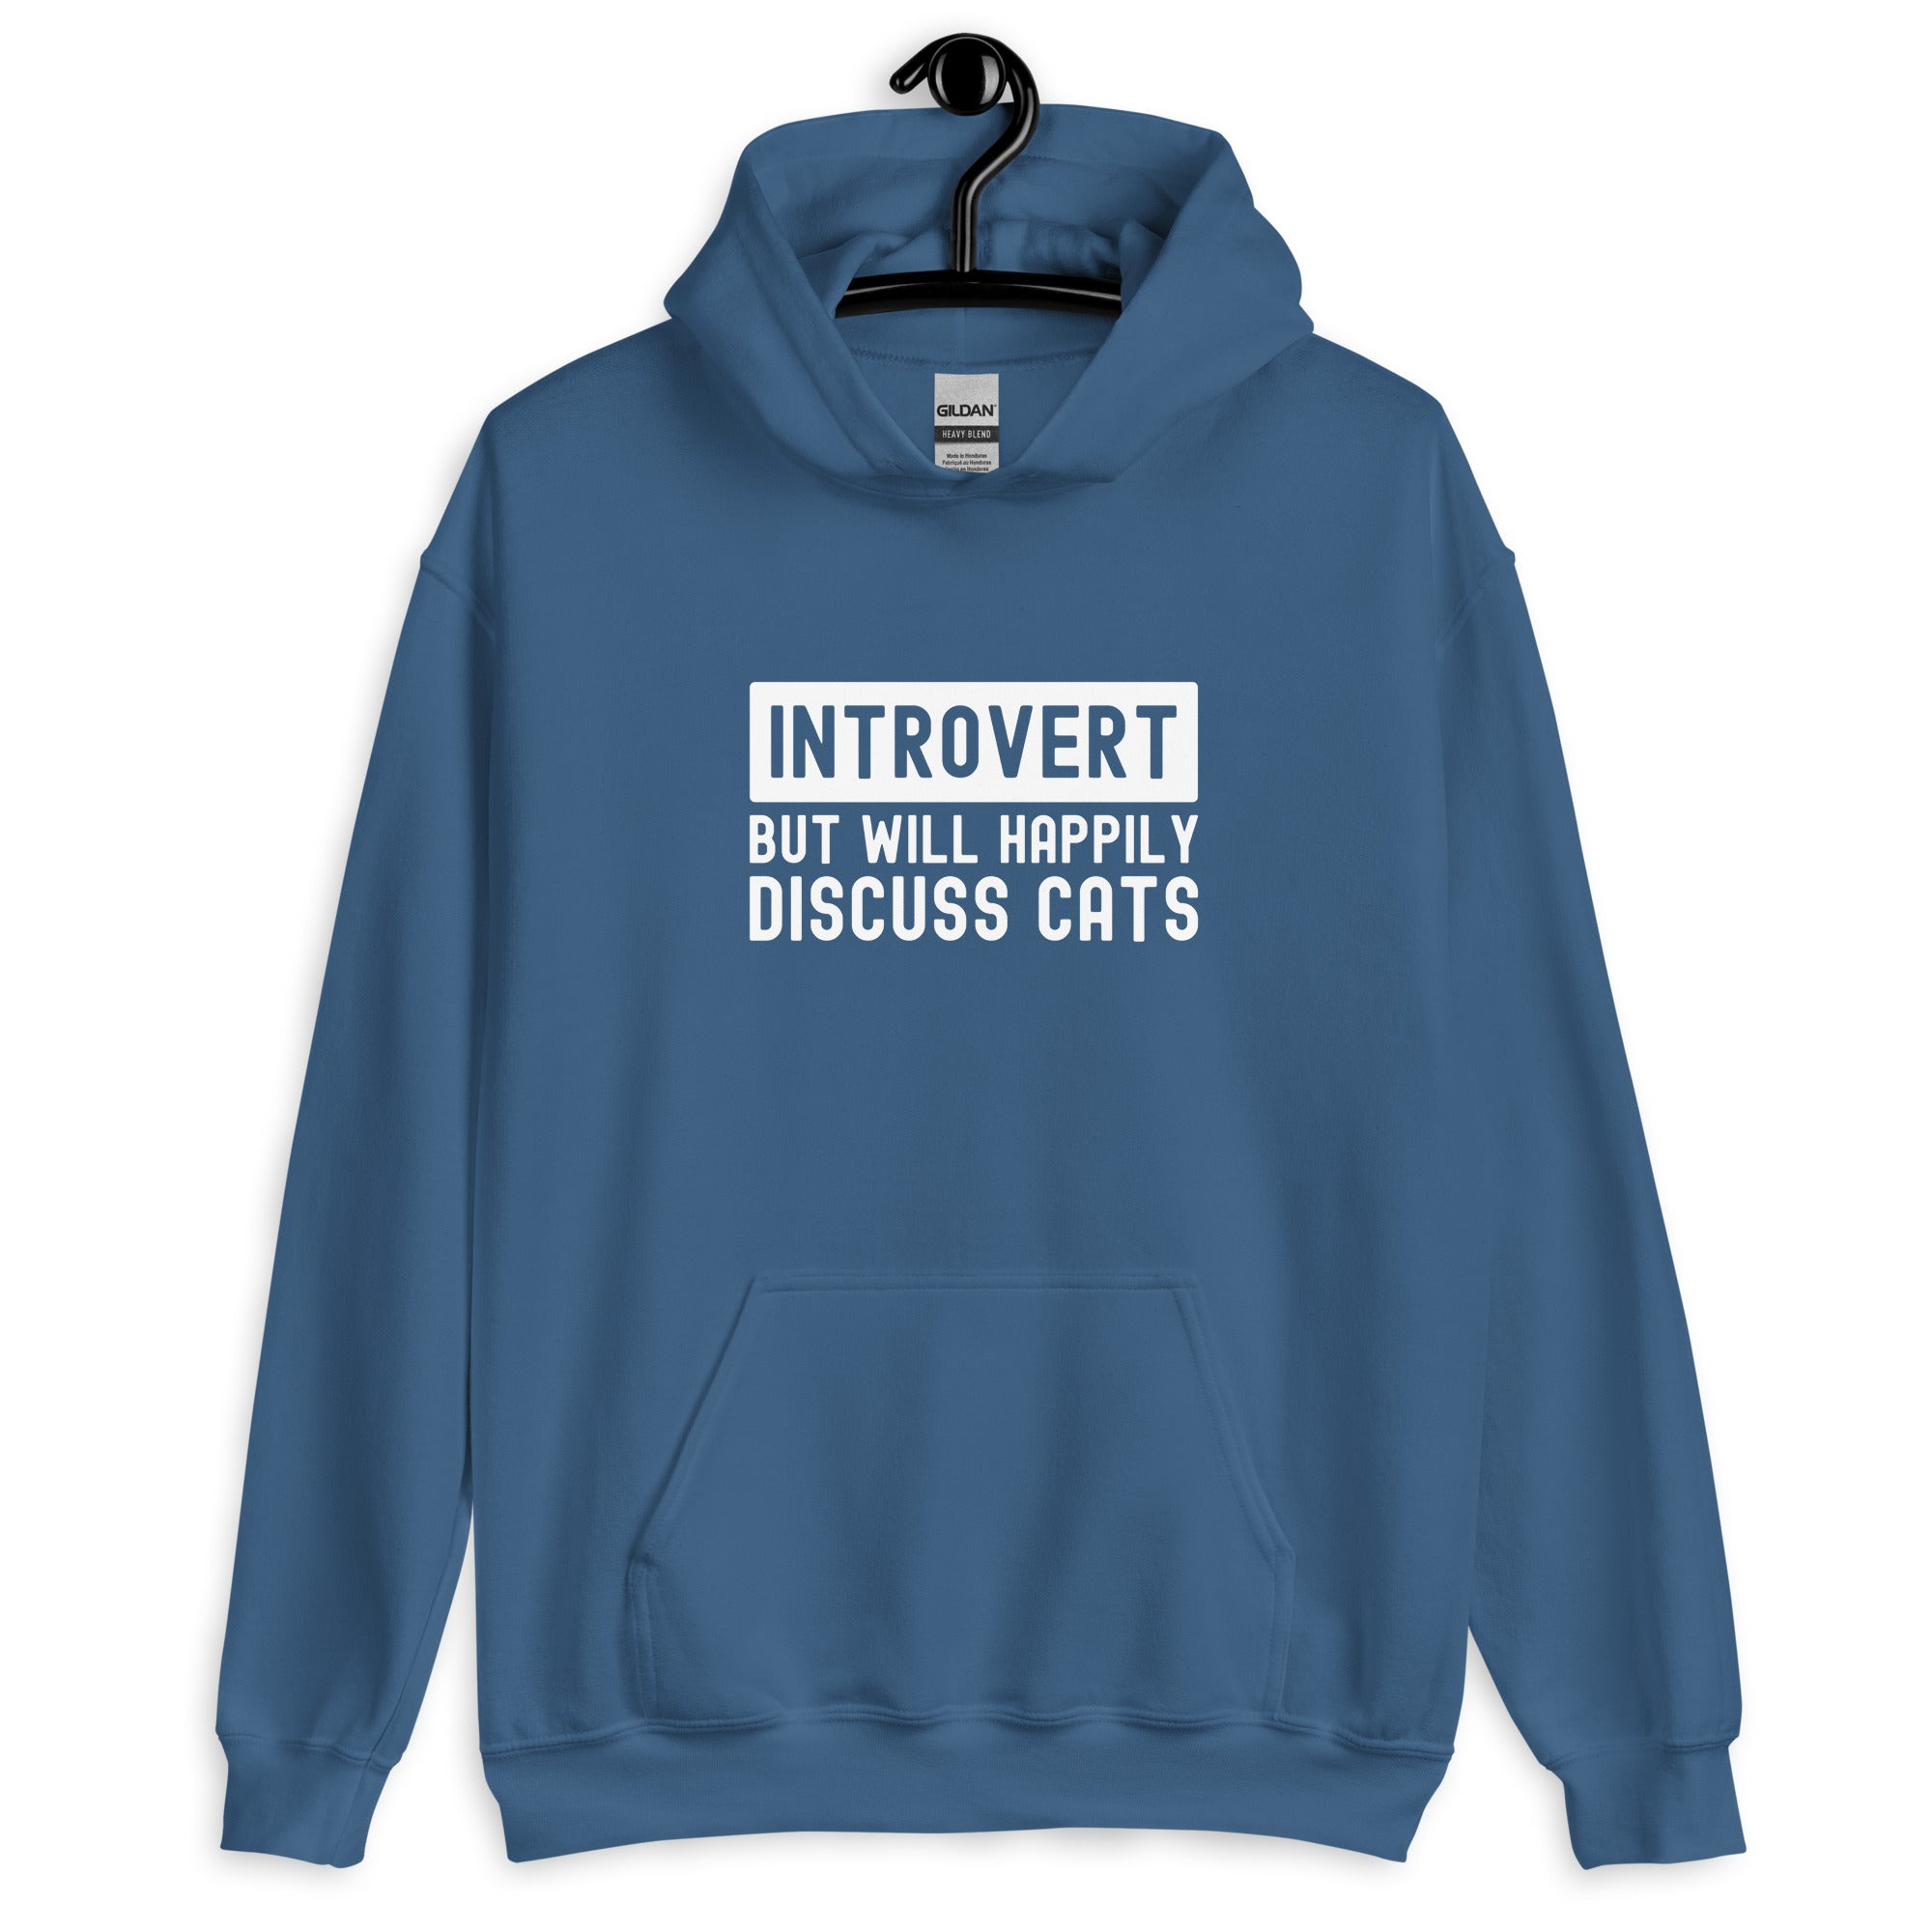 Unisex Hoodie | Introvert but will happily discuss dogs